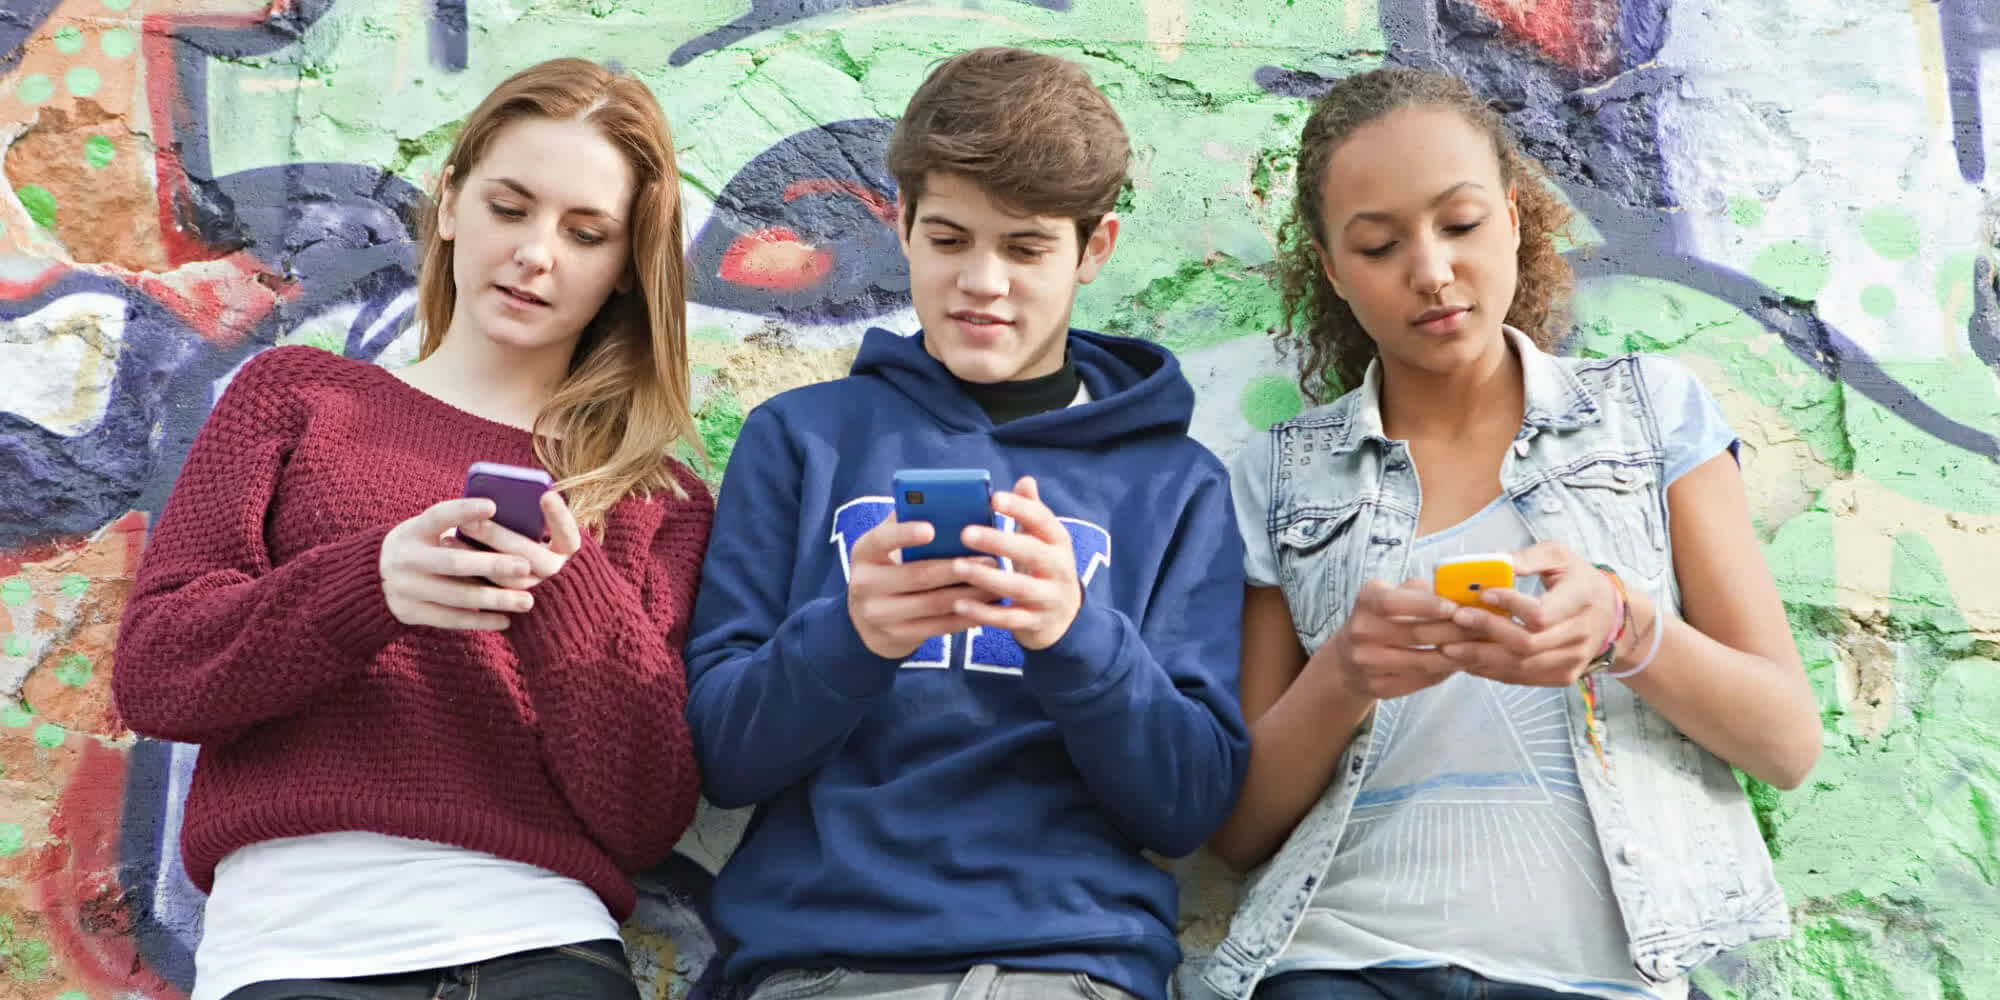 American Psychological Affiliation points pointers to restrict the potential hurt of social media on youngsters